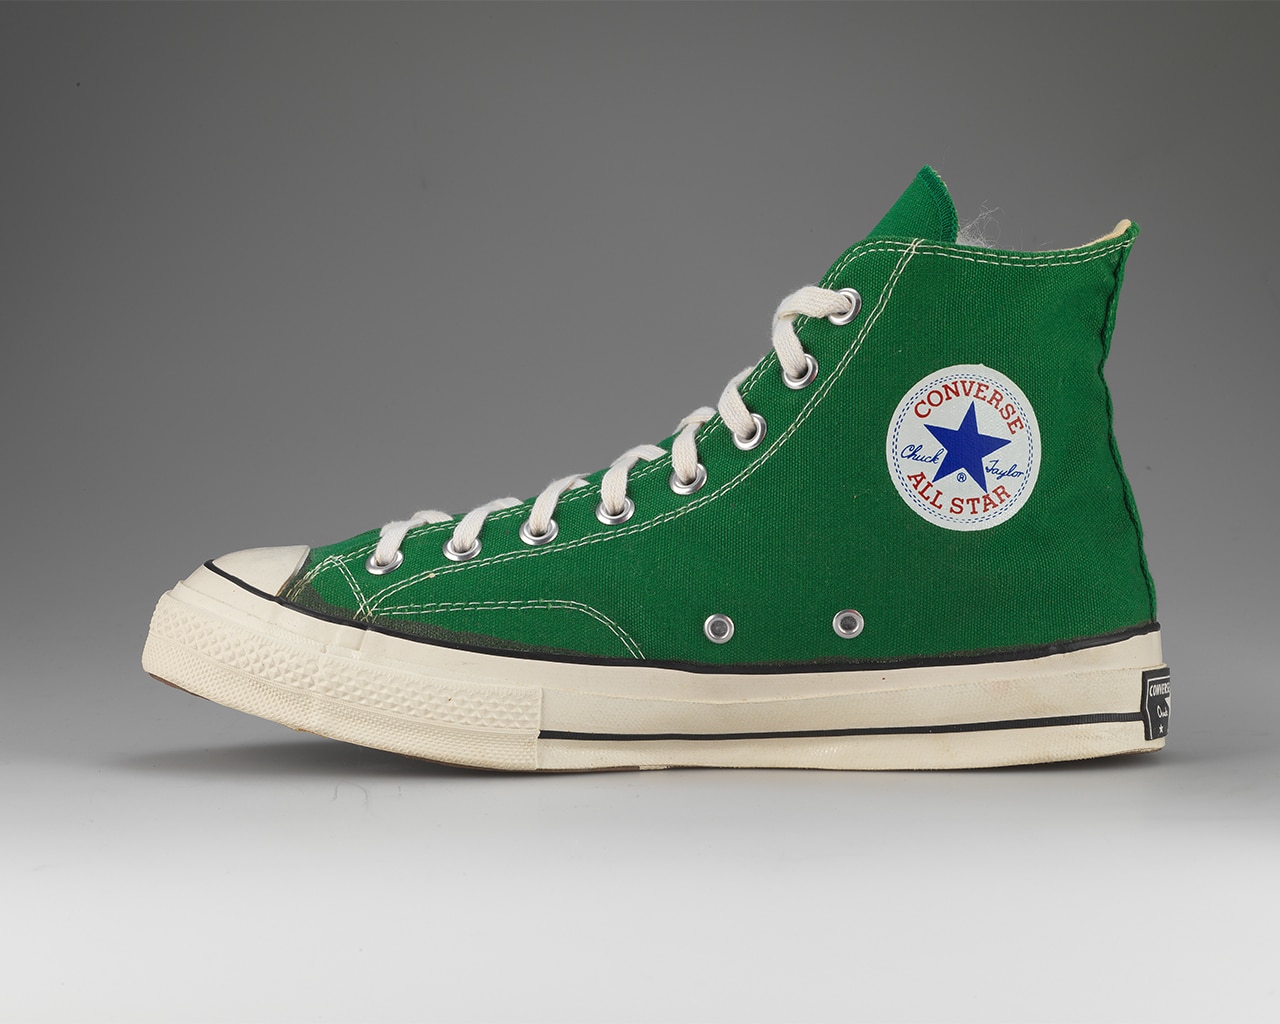 History Of The Converse Chuck All Star Sneaker | The Journal | MR